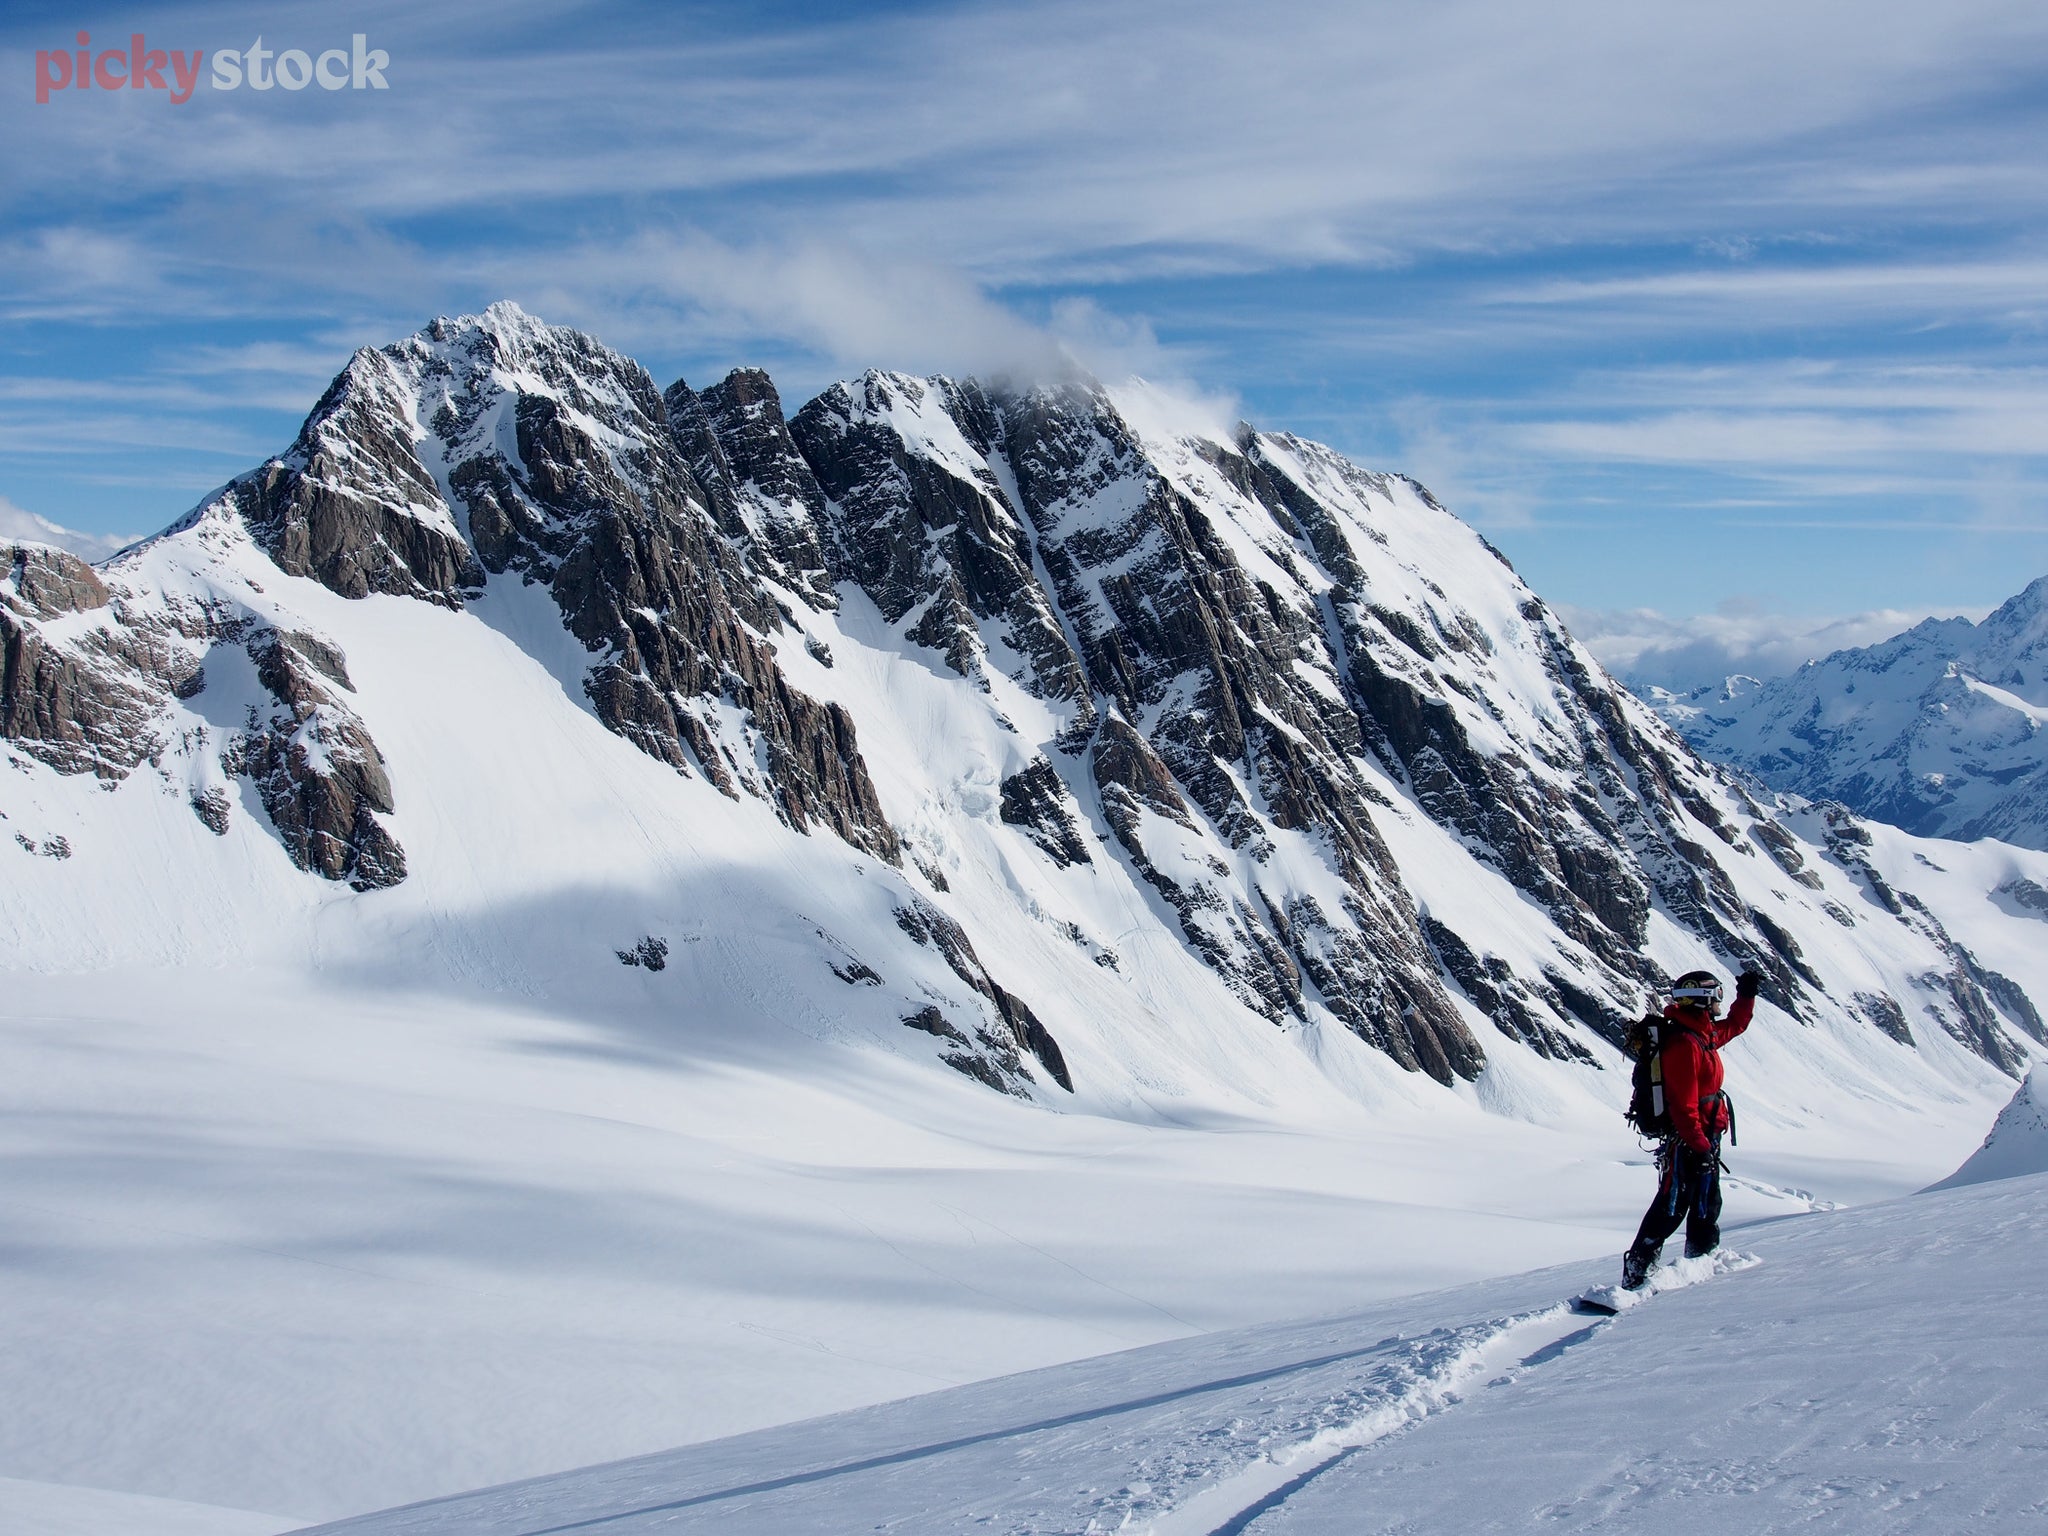 Landscape of a man in a bright red jacket traversing an epic mountain range on a snowboard entrenching neat grooves into the snow as they overlook the slopes.